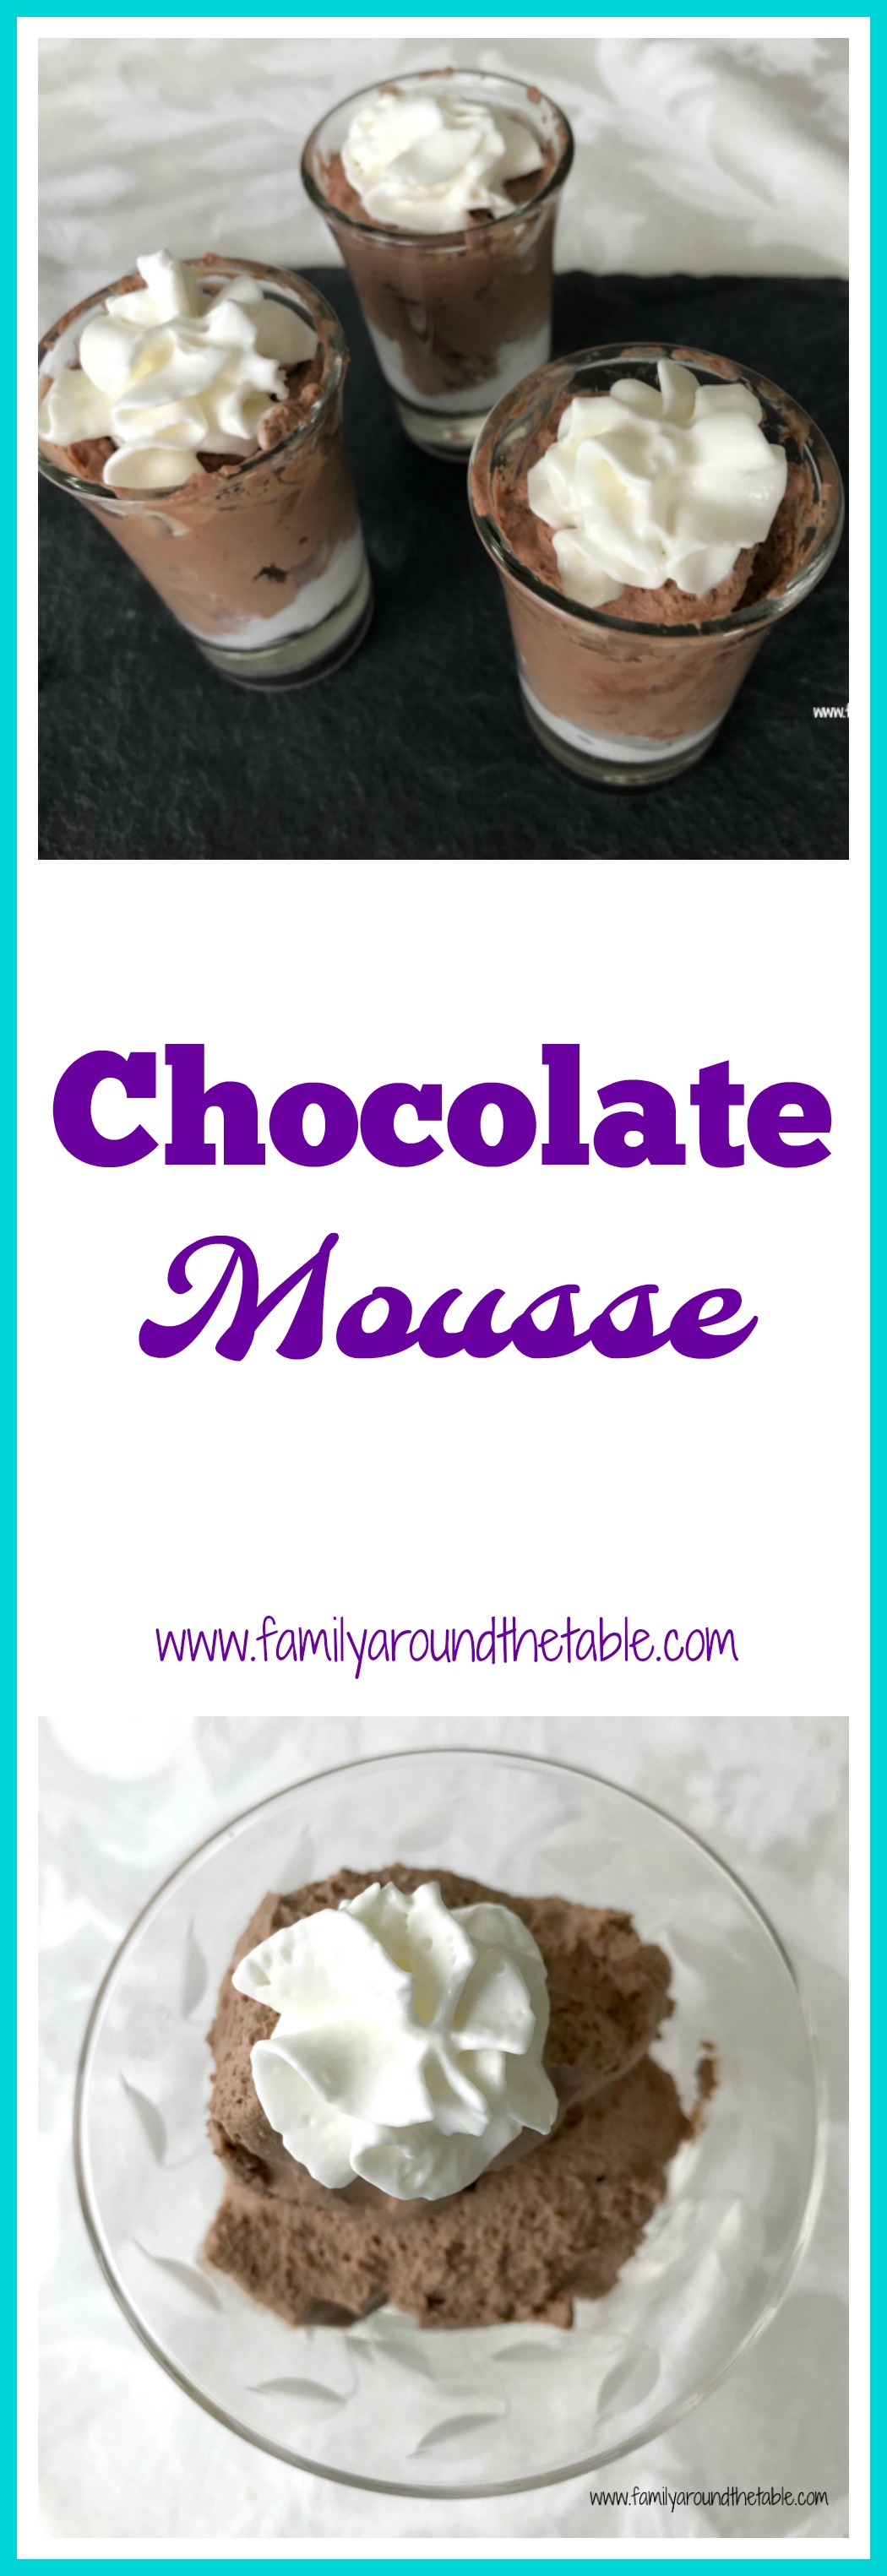 Chocolate mousse is perfect for entertaining. Serve in shot glasses for a dessert buffet